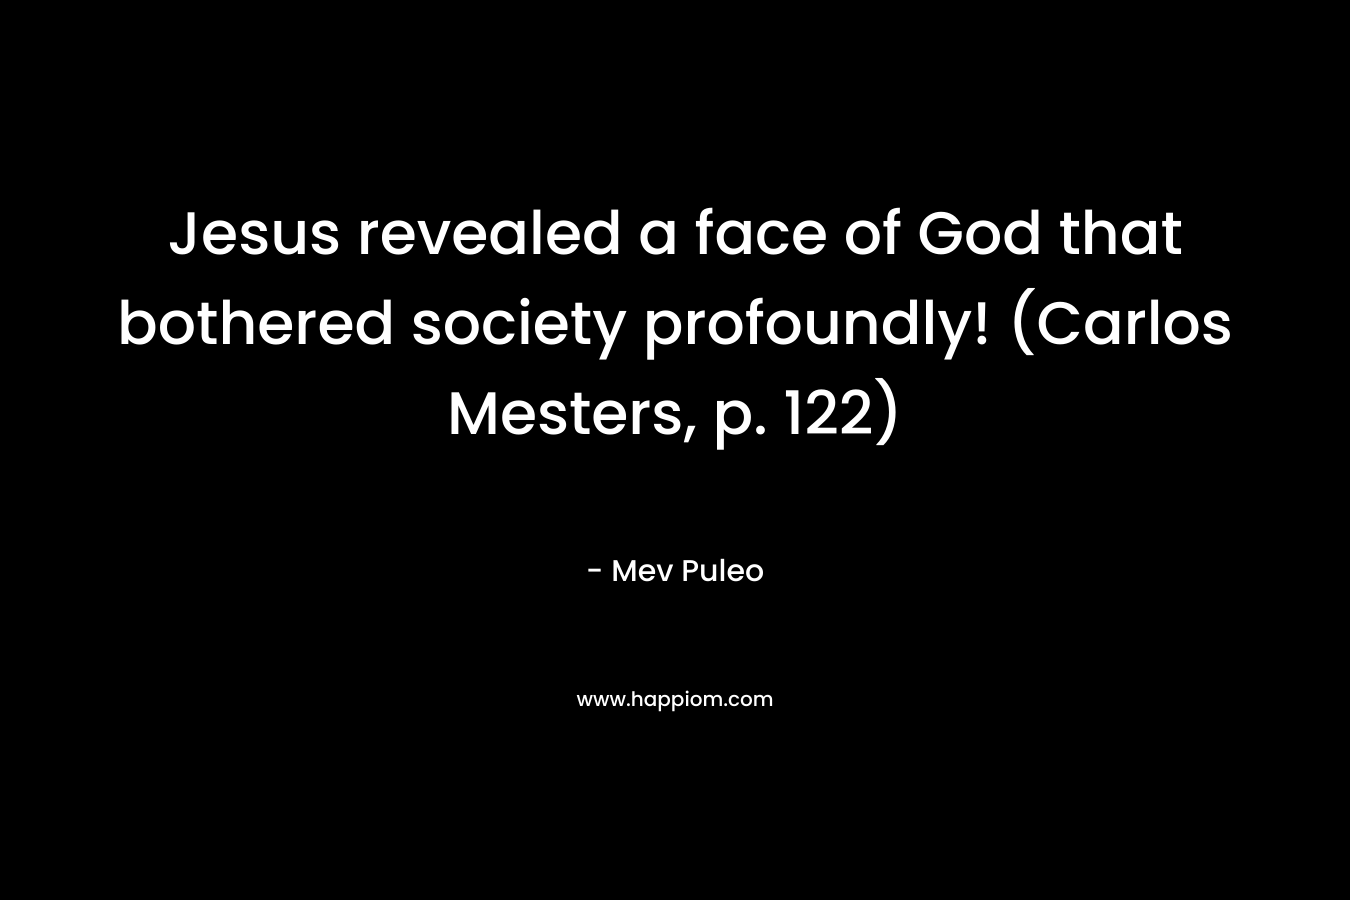 Jesus revealed a face of God that bothered society profoundly! (Carlos Mesters, p. 122)